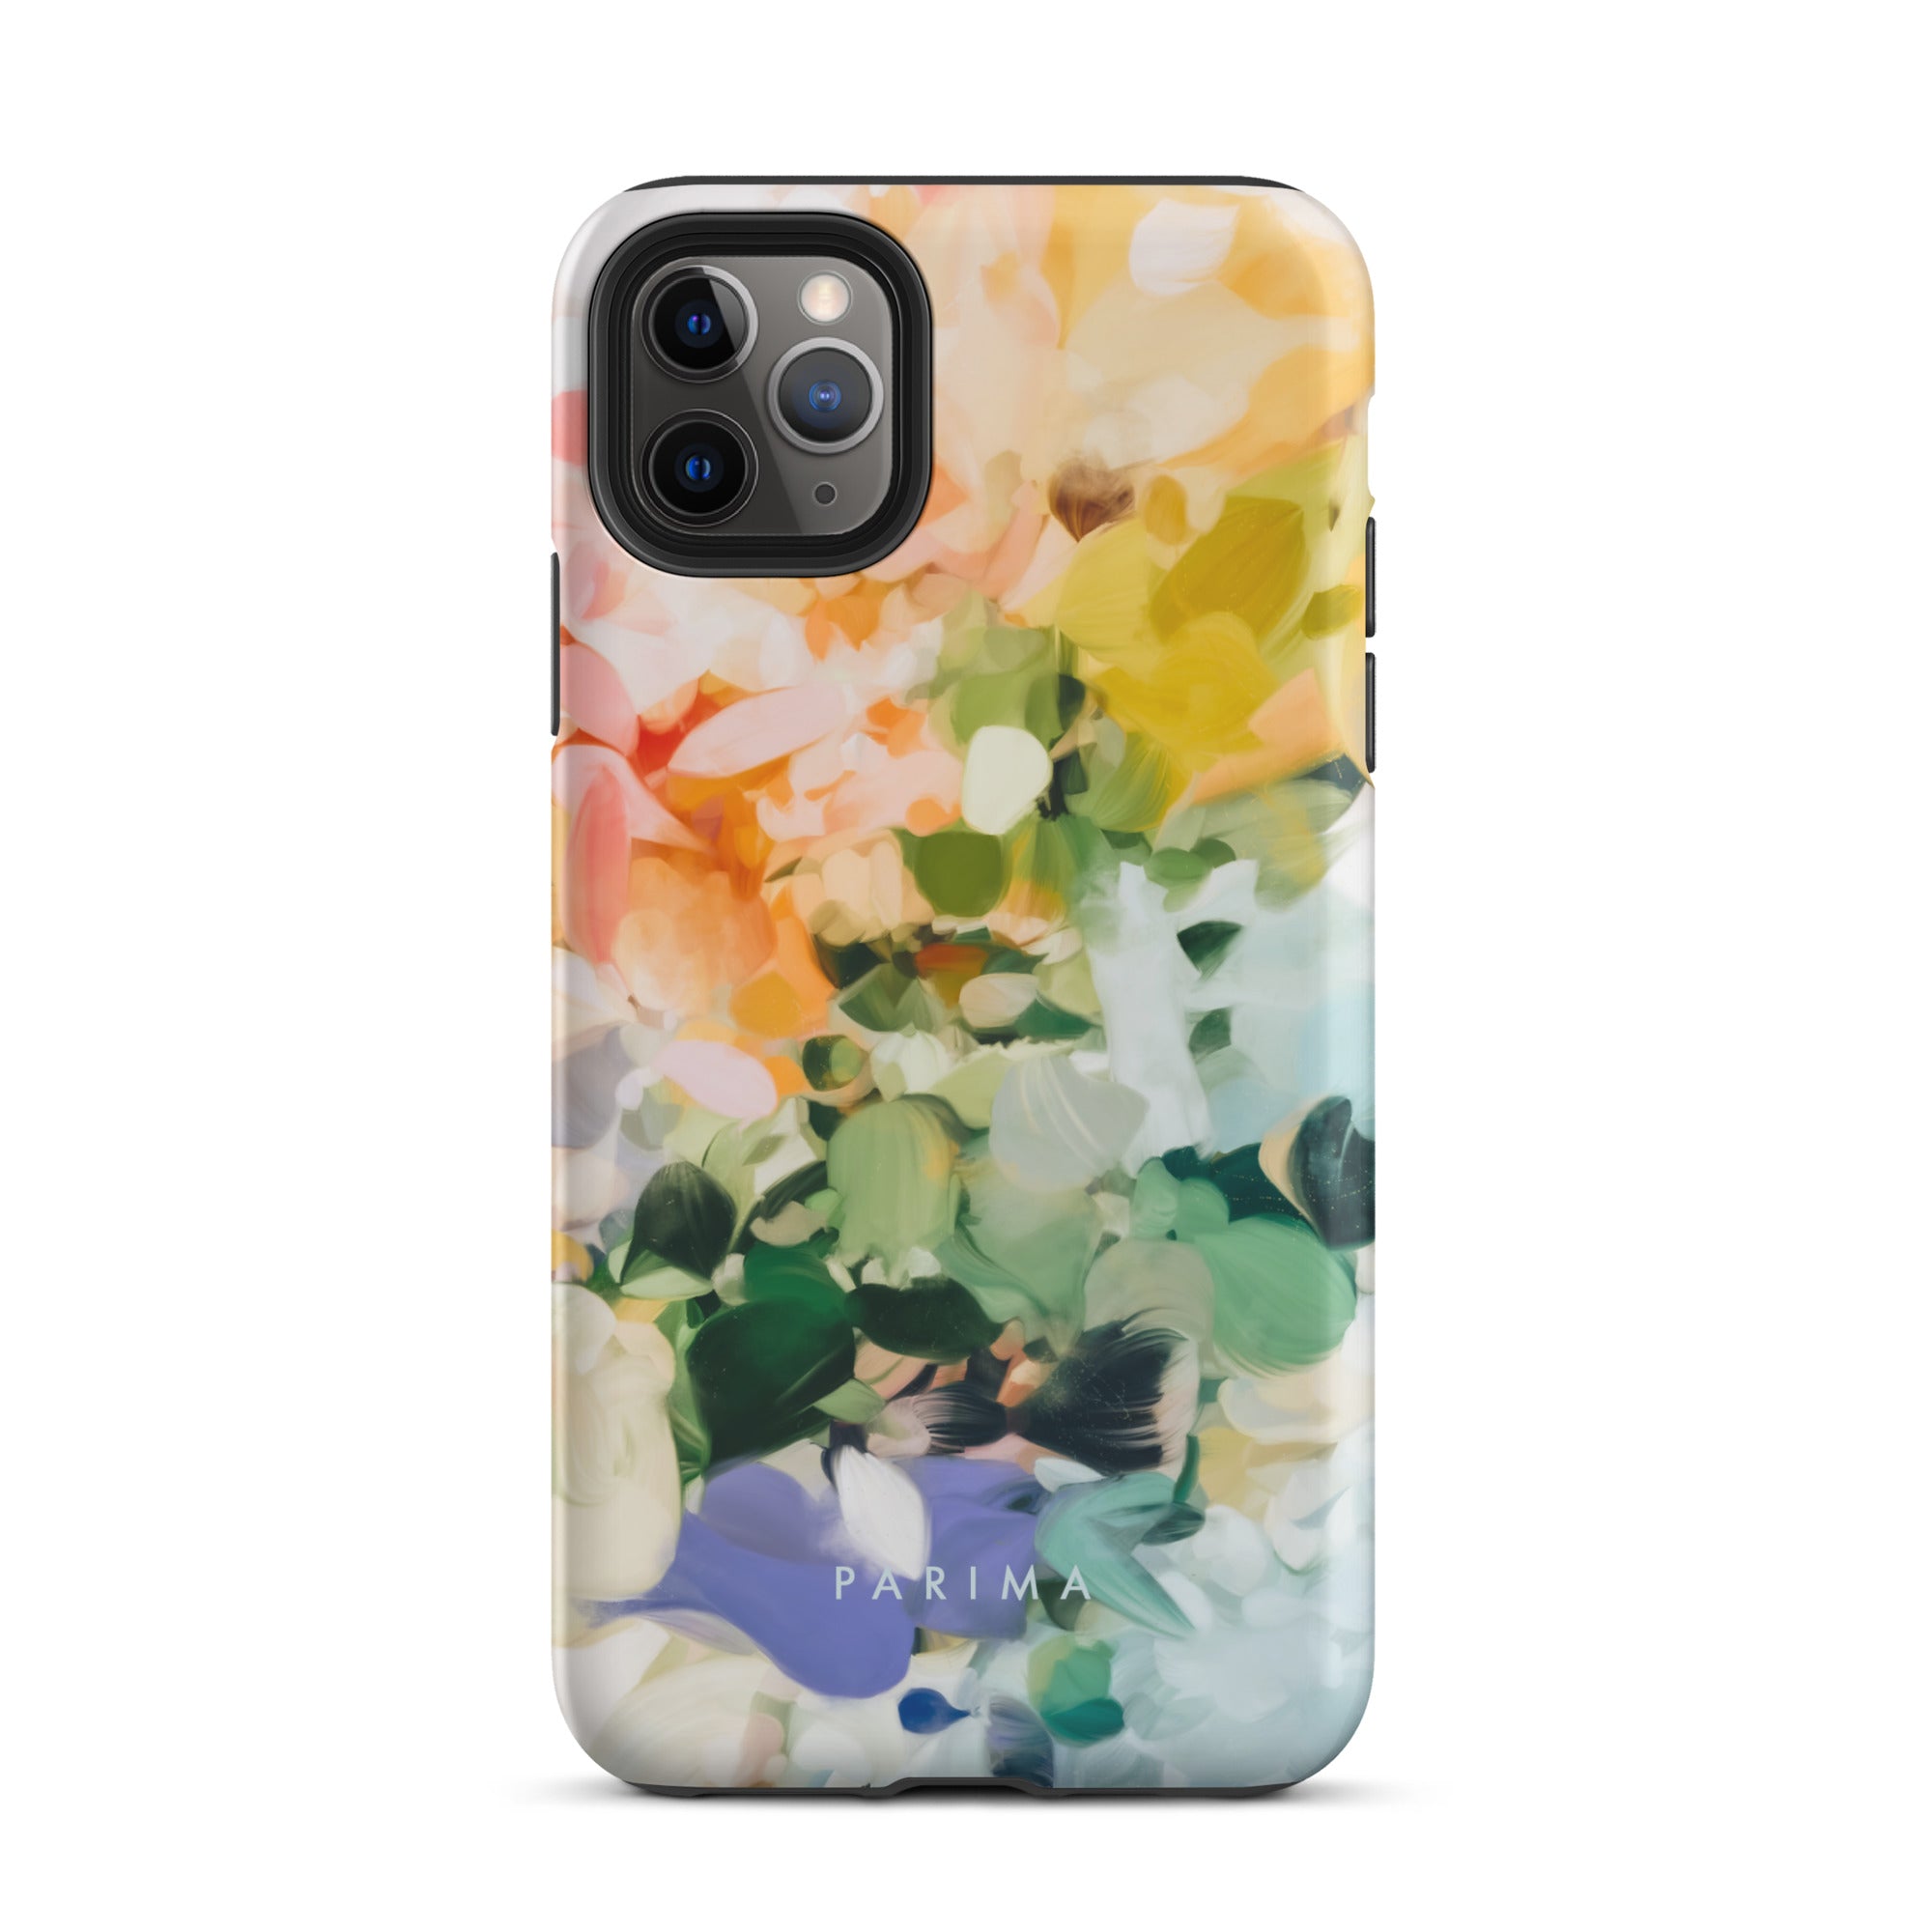 June, green and yellow abstract art - iPhone 11 Pro Max tough case by Parima Studio